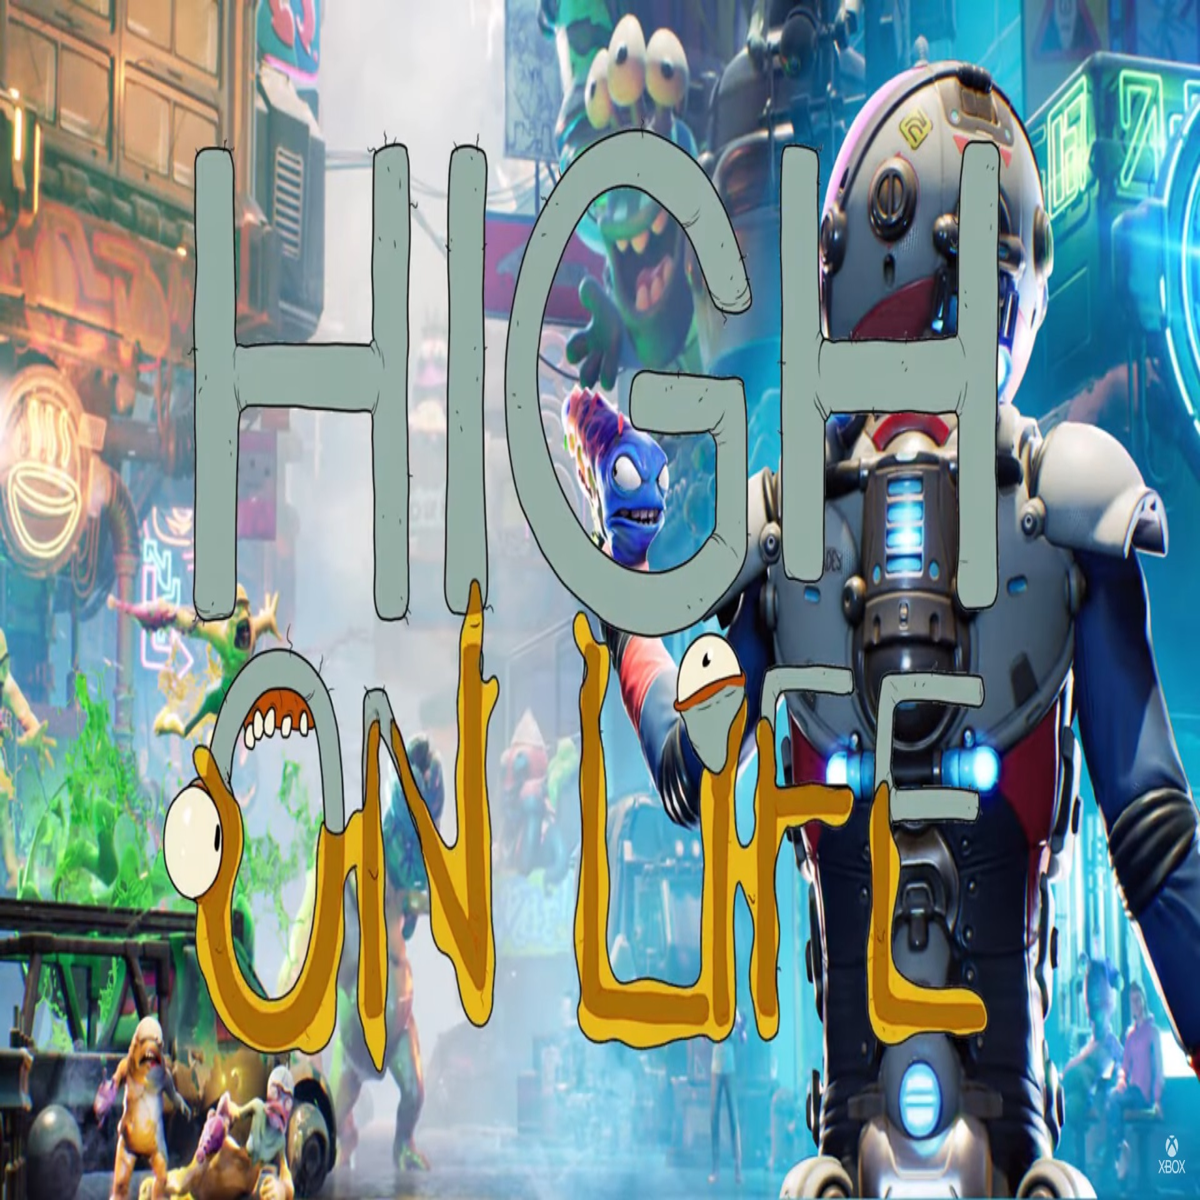 High On Life Delayed to December 13